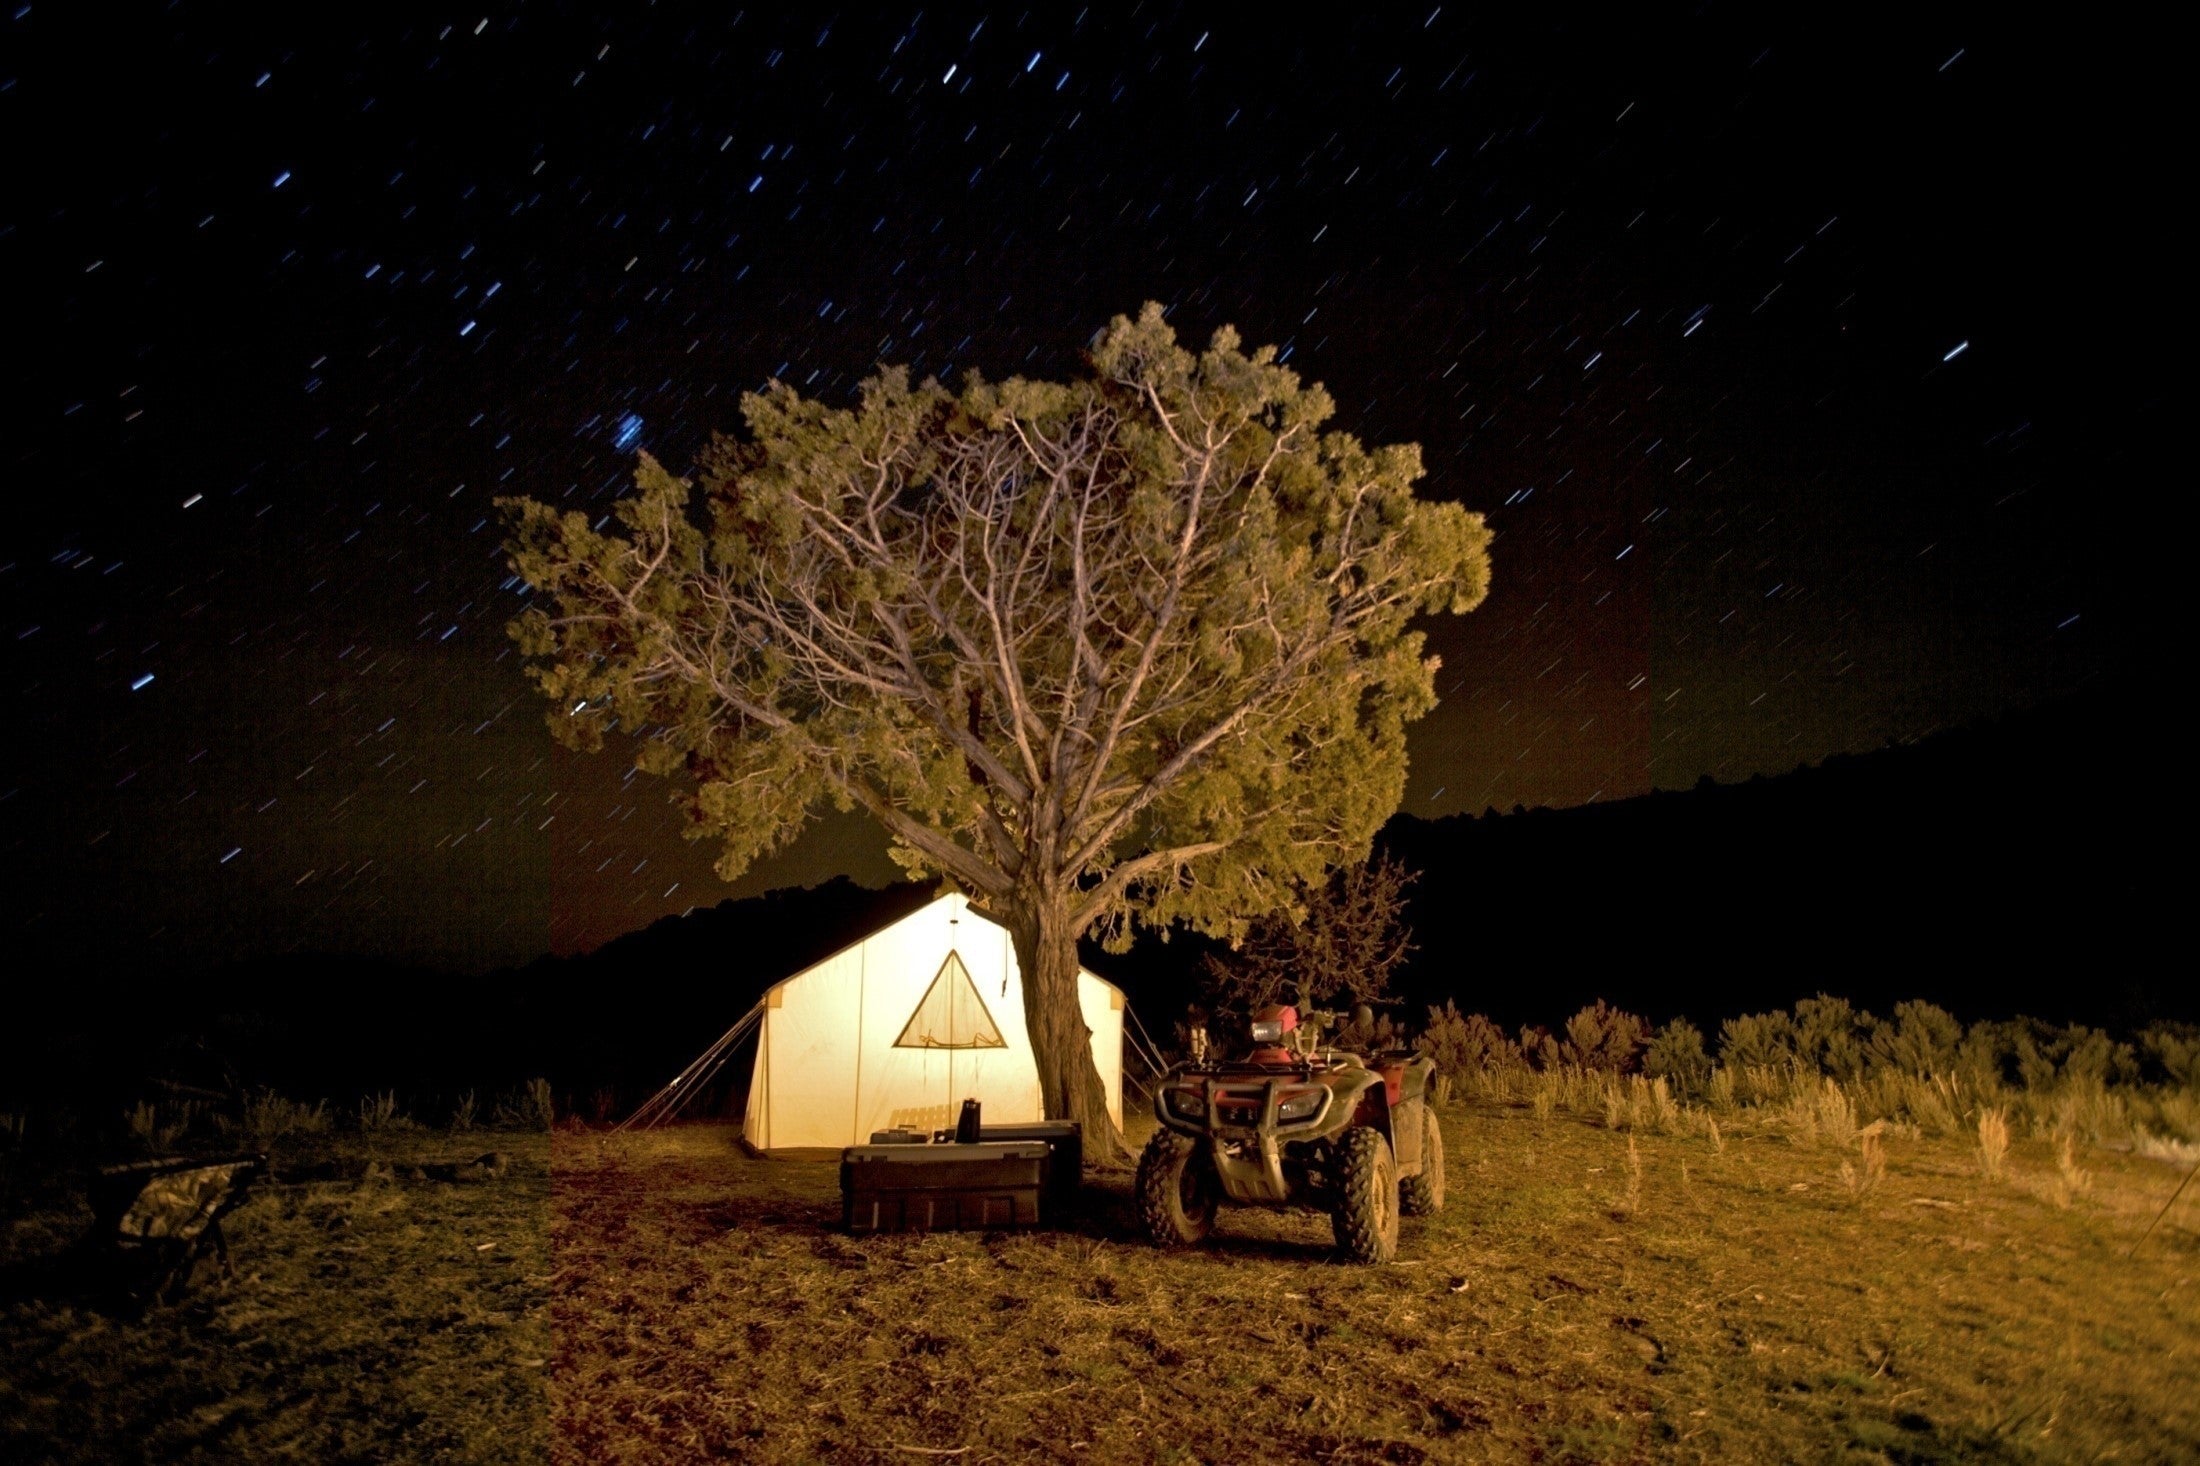 Colorado Tent at night with stars overhead - Best camping, hunting, fishing, glamping tents made in USA